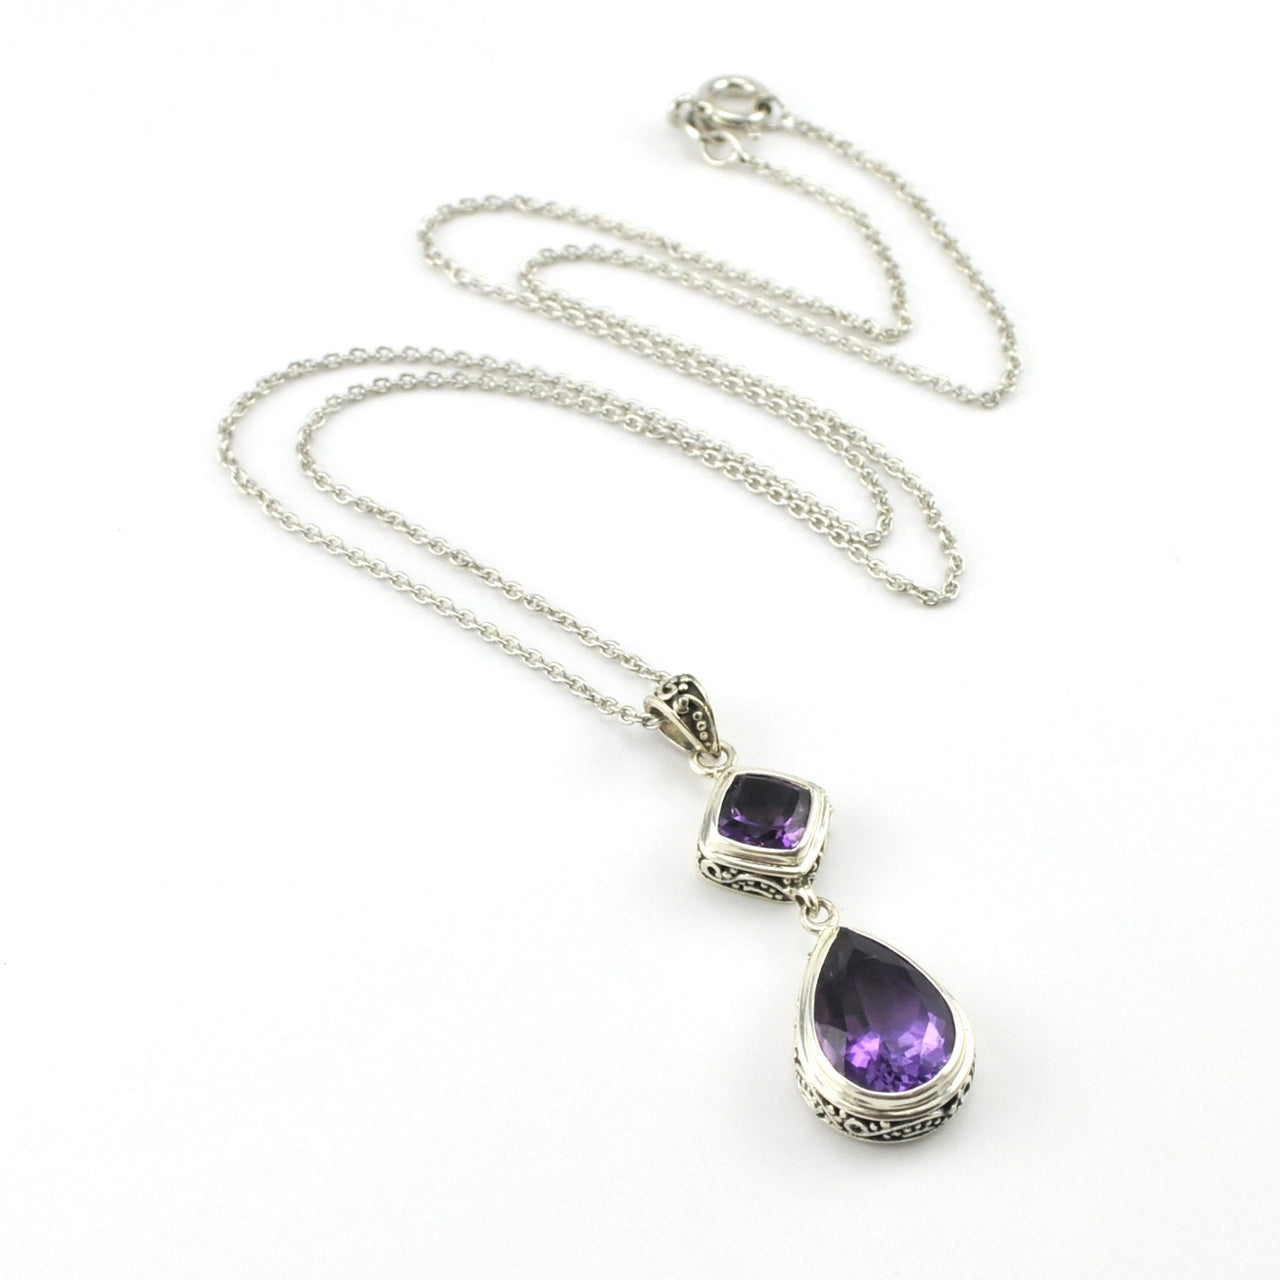 Handcrafted Amethyst Jewelry